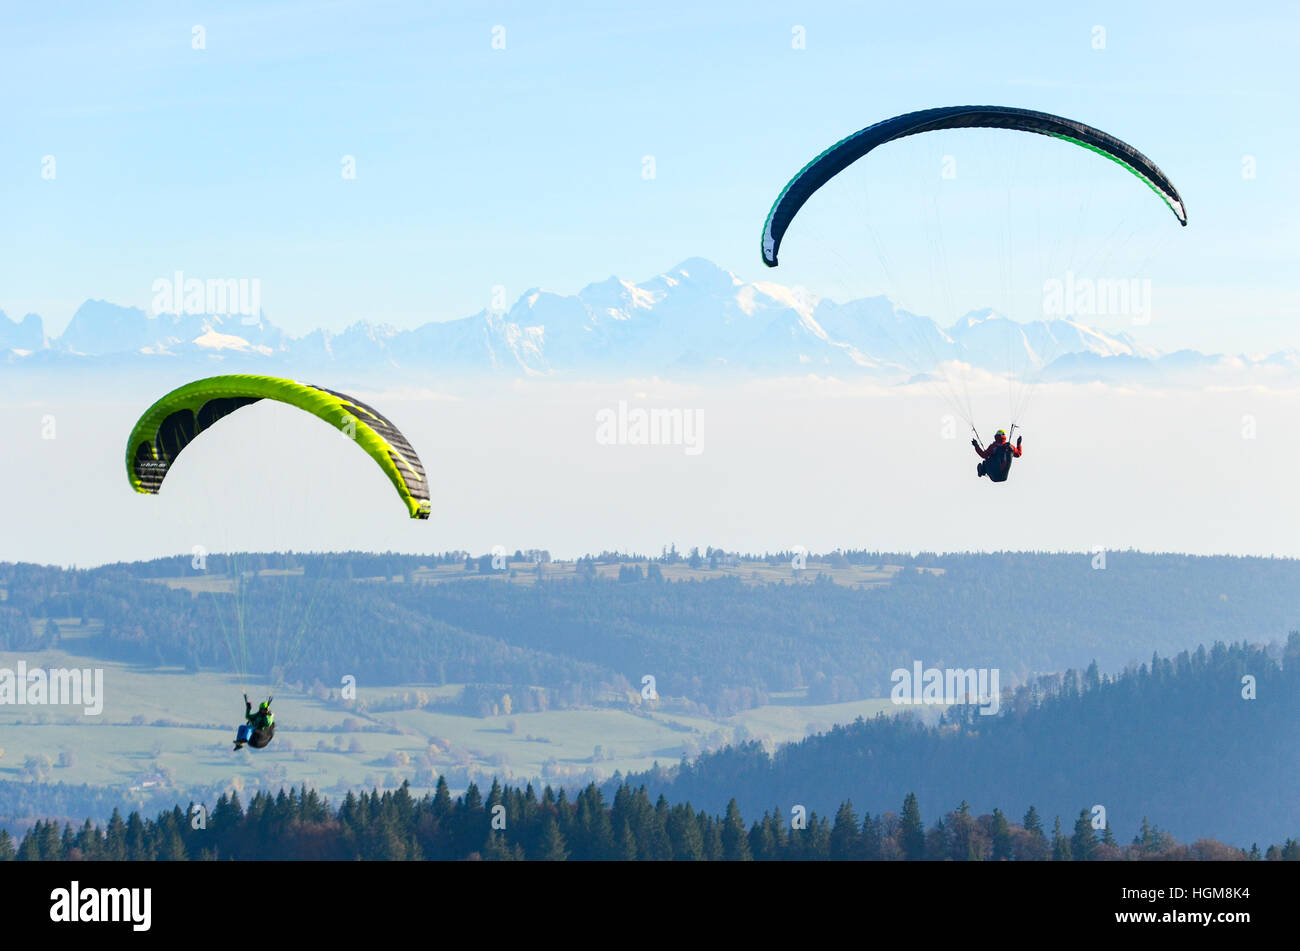 Paragliders flying over the Jura mountains with snowy Alps in the background Stock Photo